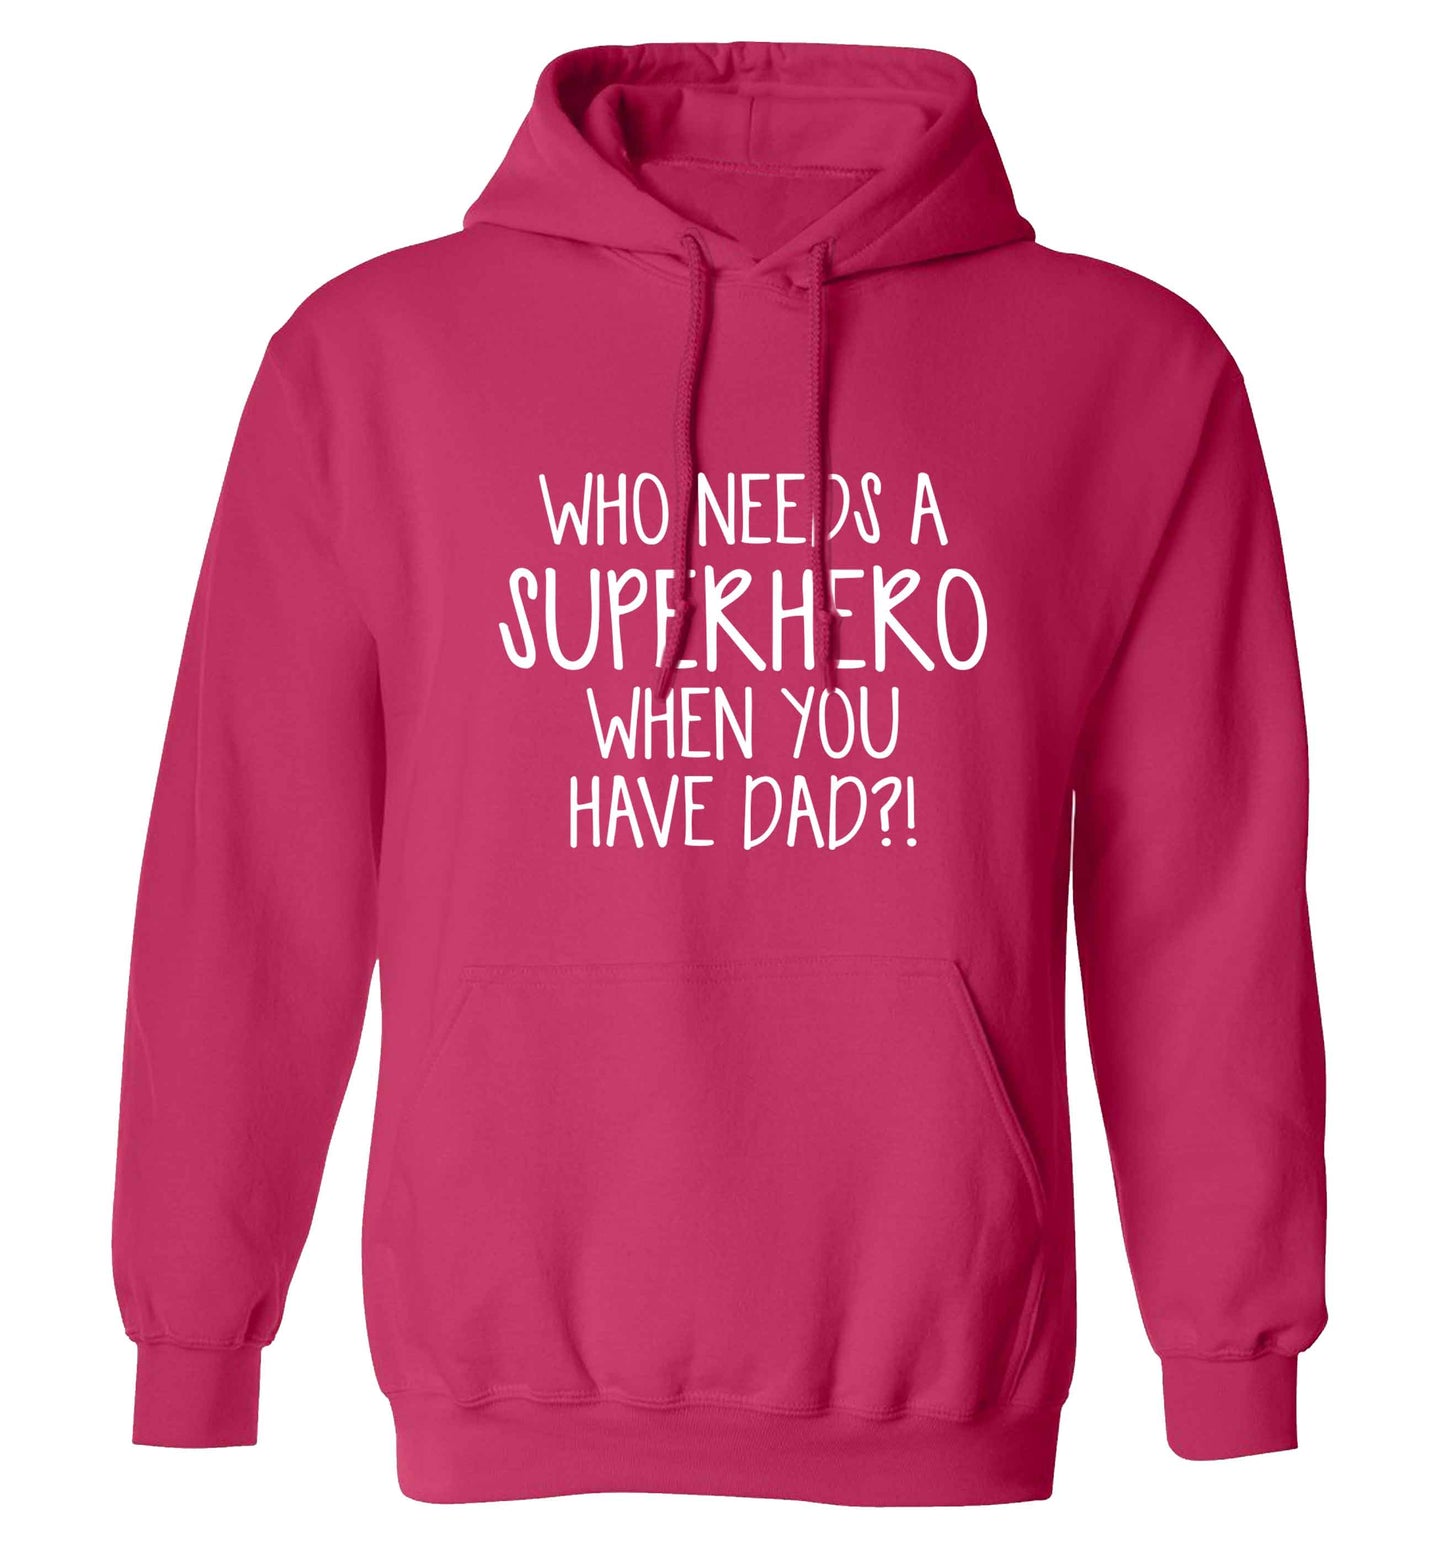 Who needs a superhero when you have dad! adults unisex pink hoodie 2XL